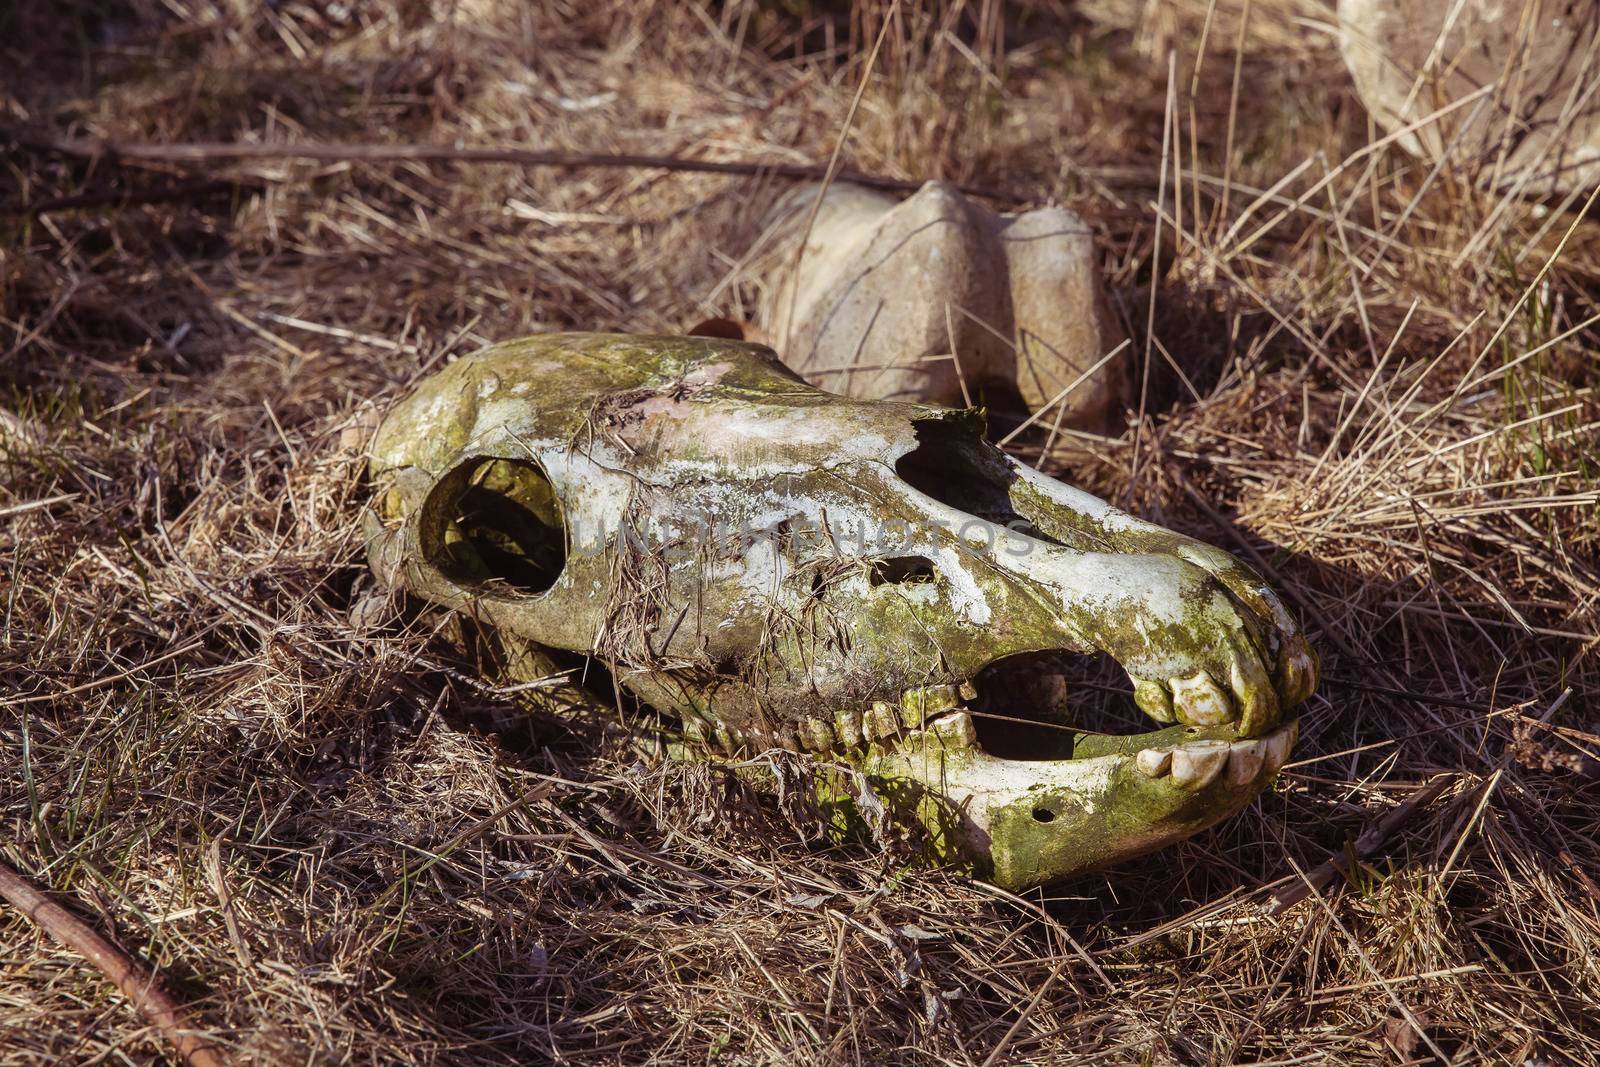 Old abandoned horse skull in dry grass.